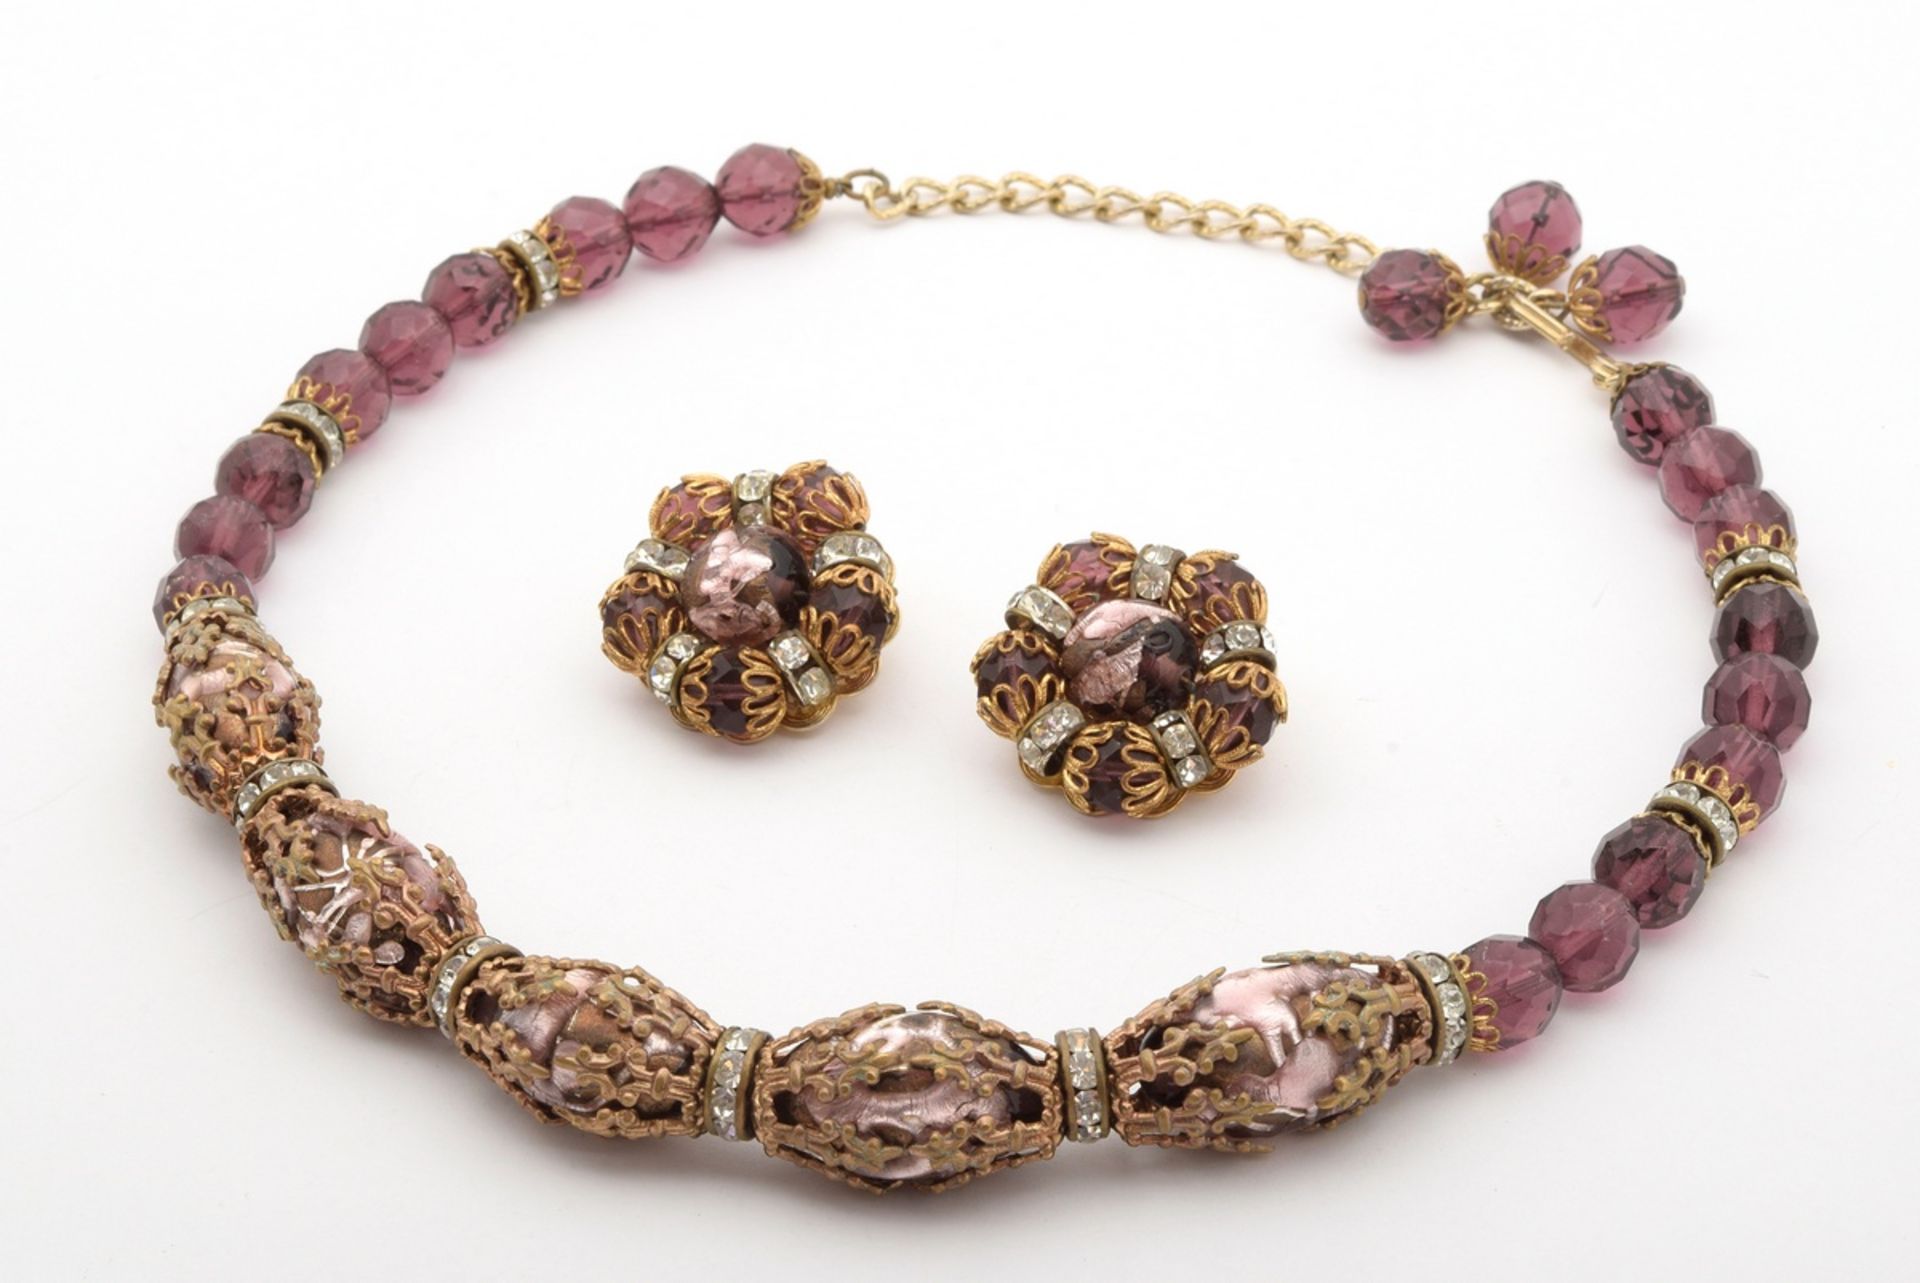 3 pieces of gold-plated vintage costume jewellery with violet glass and rhinestones, signed "Hobé":